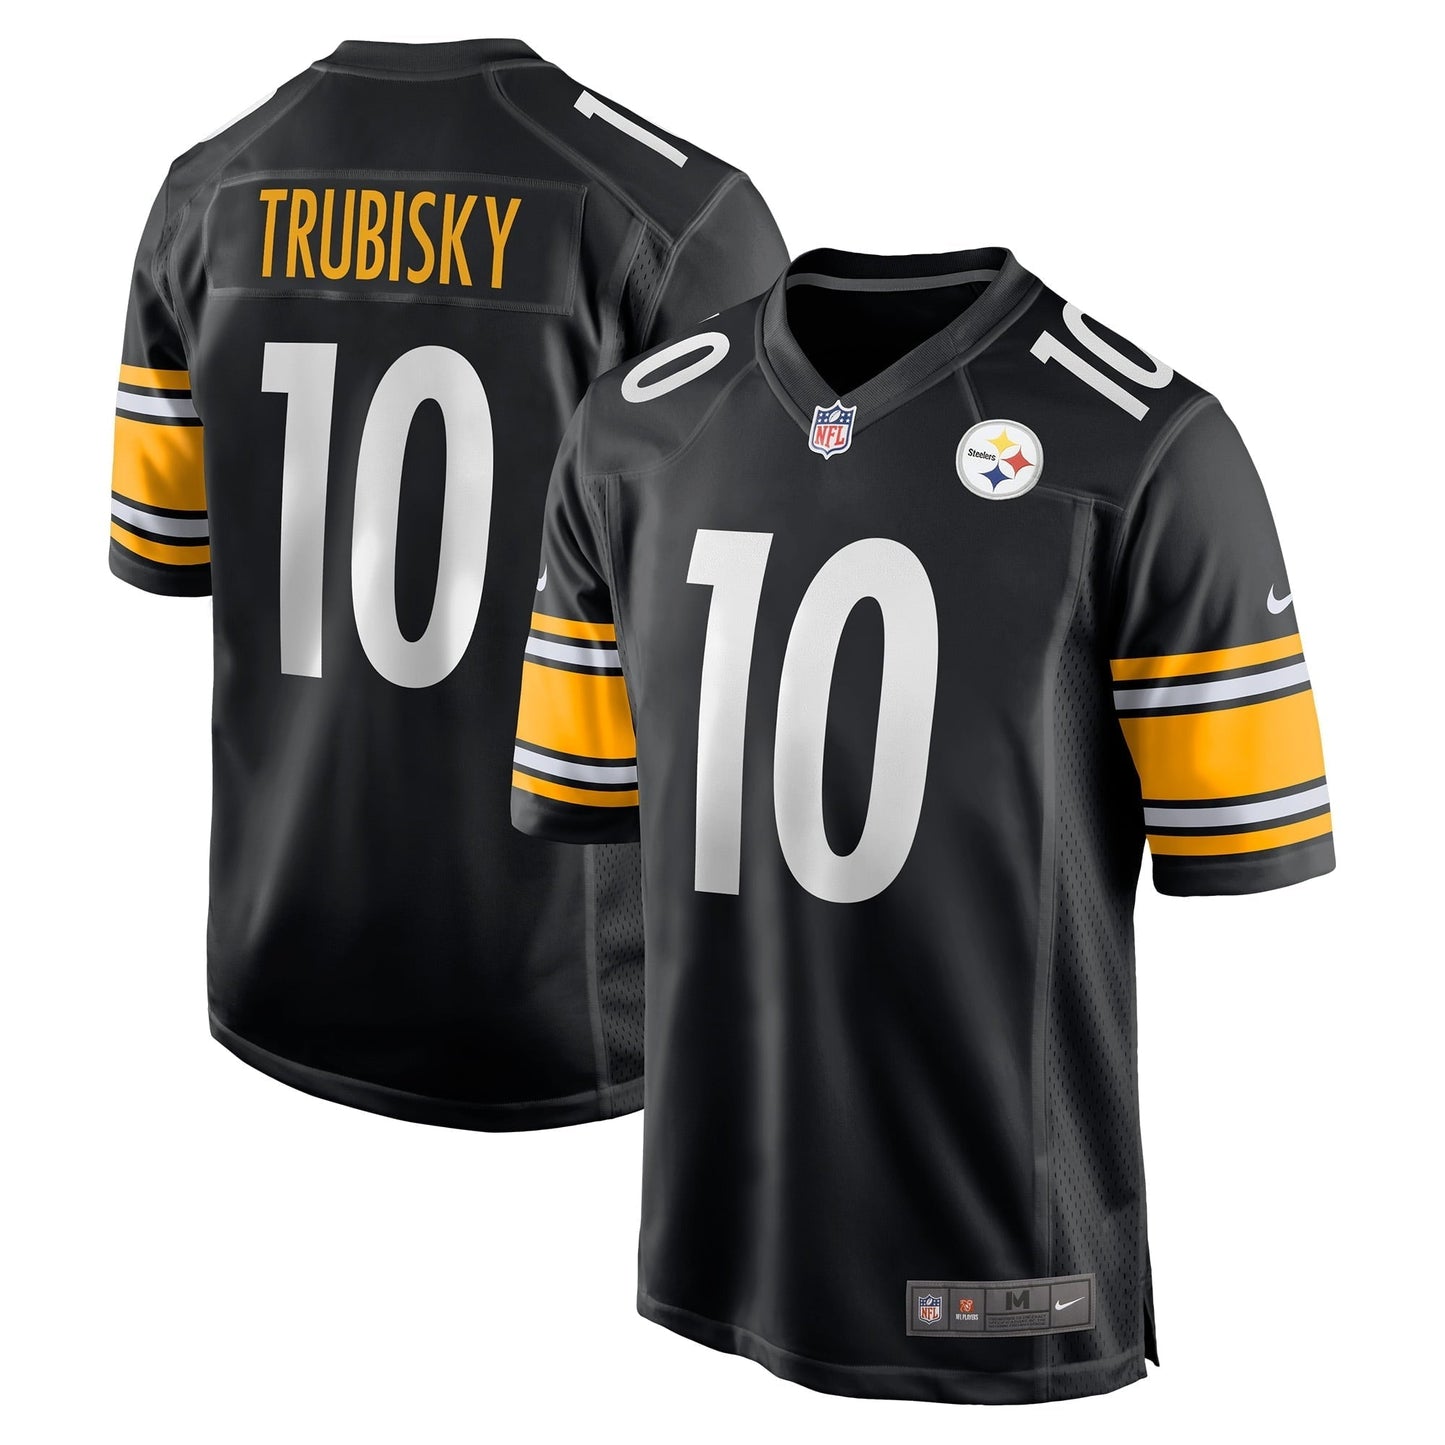 Men's Nike Mitchell Trubisky Black Pittsburgh Steelers Game Jersey